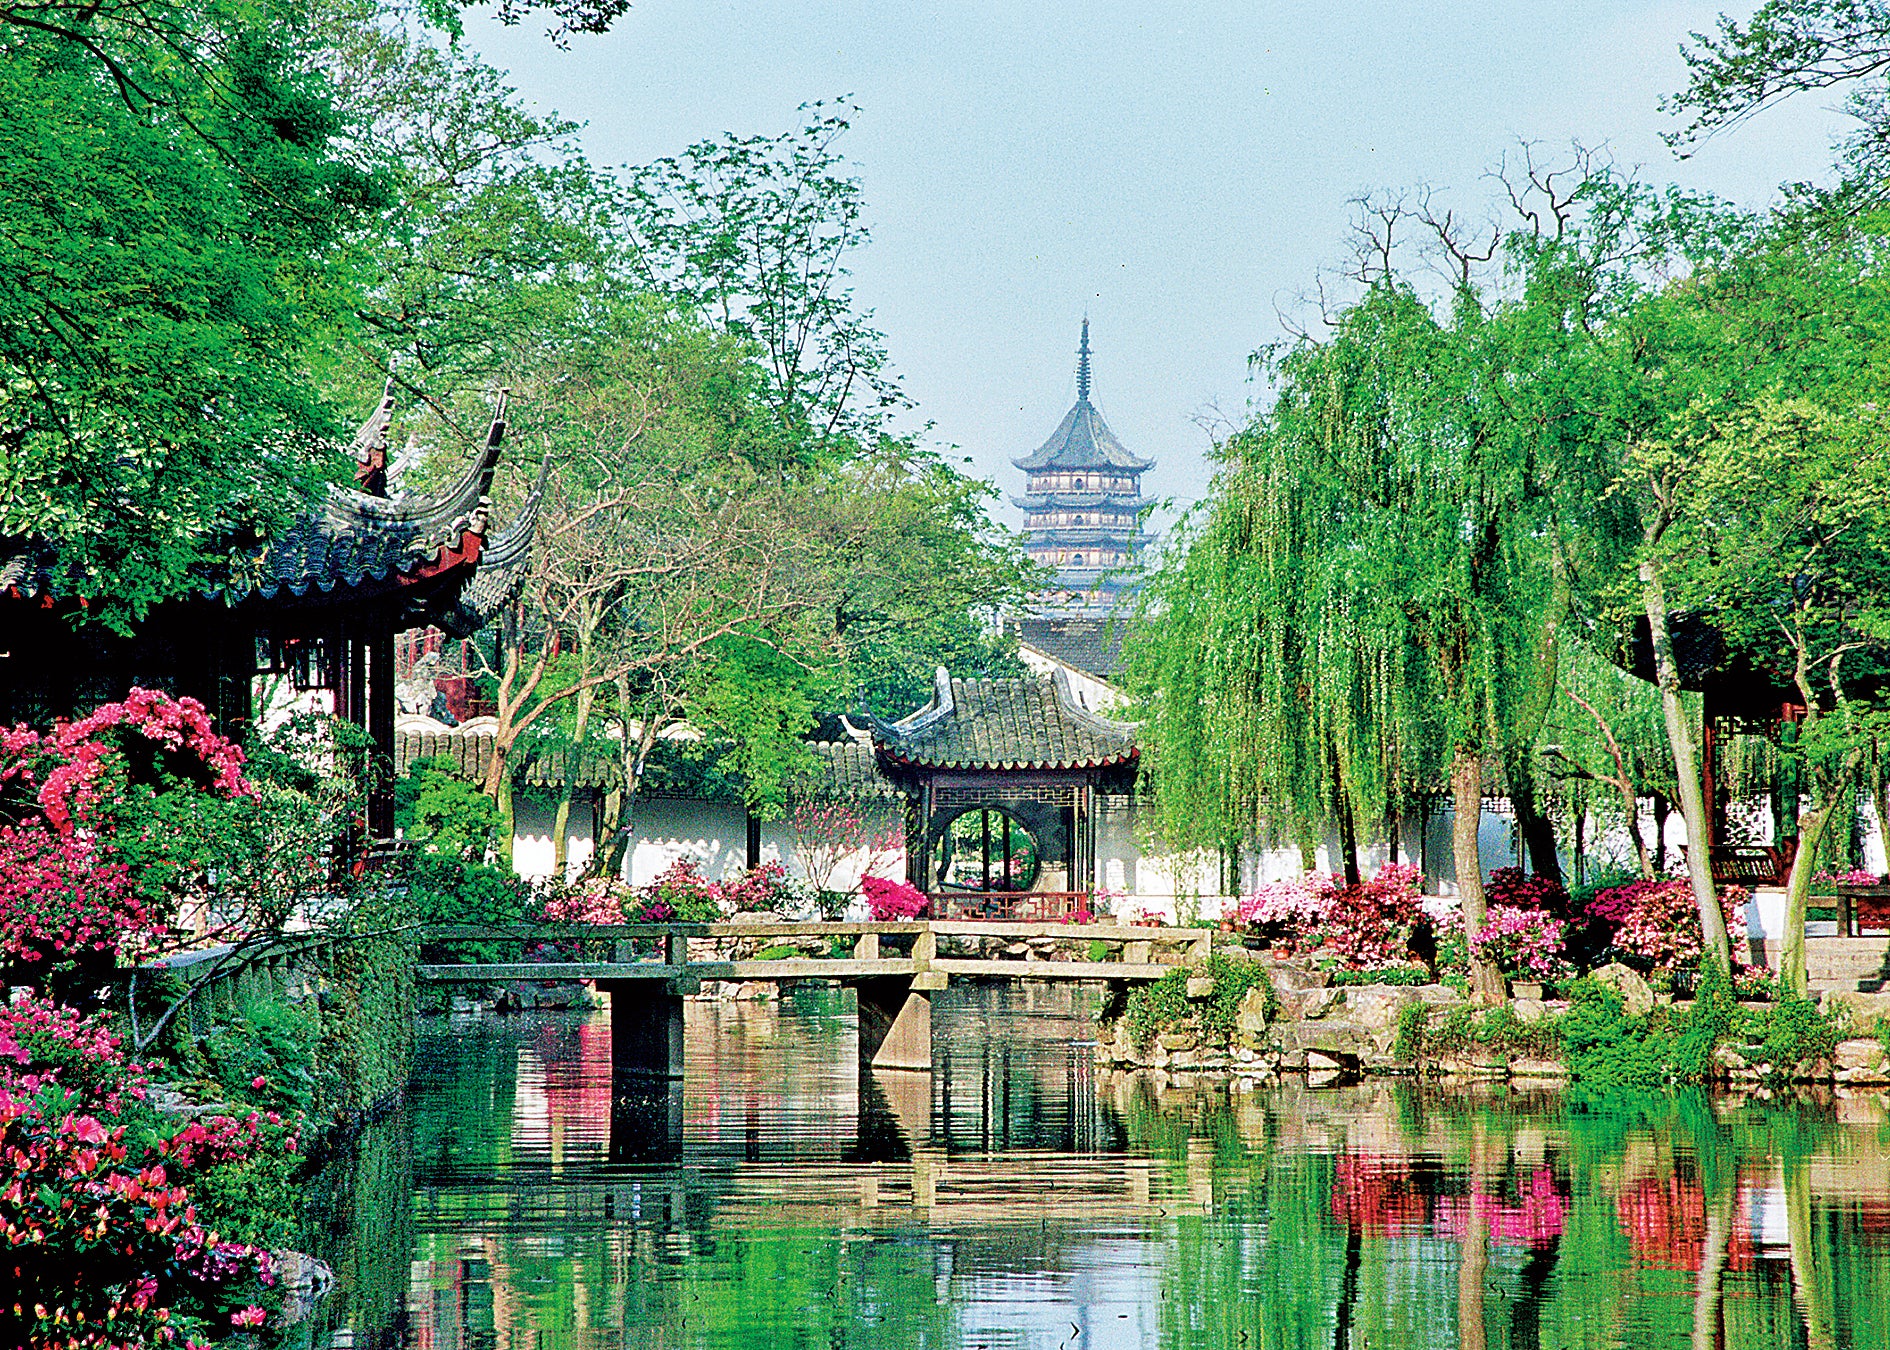 A tower in the distance is part of the view at the Humble Administrator’s Garden in Suzhou